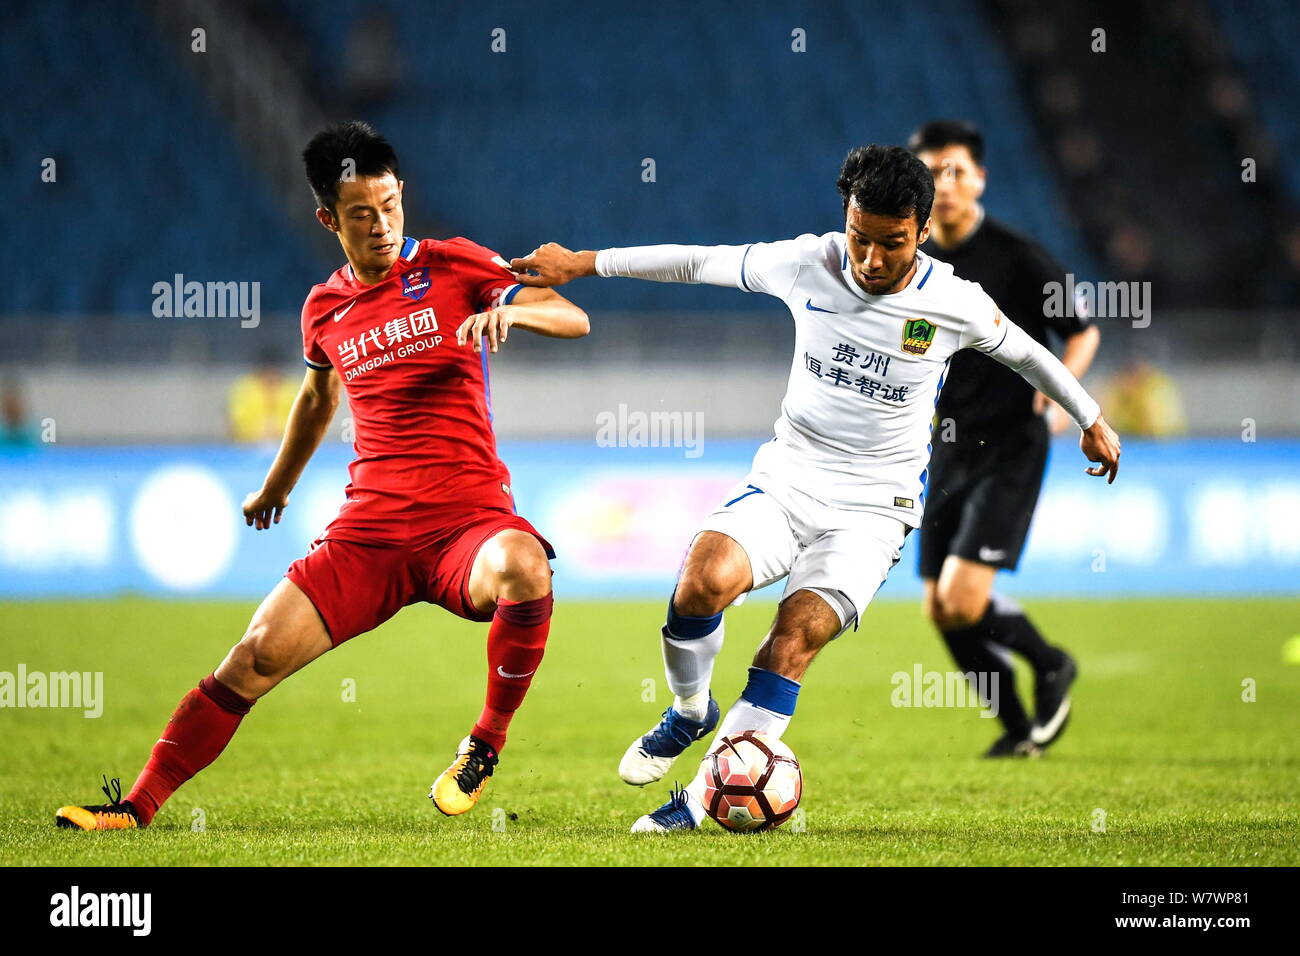 Australian football player Ryan McGowan of Guizhou Zhicheng, right, challenges a player of Chongqing Lifan in their fifth round match during the 2017 Stock Photo